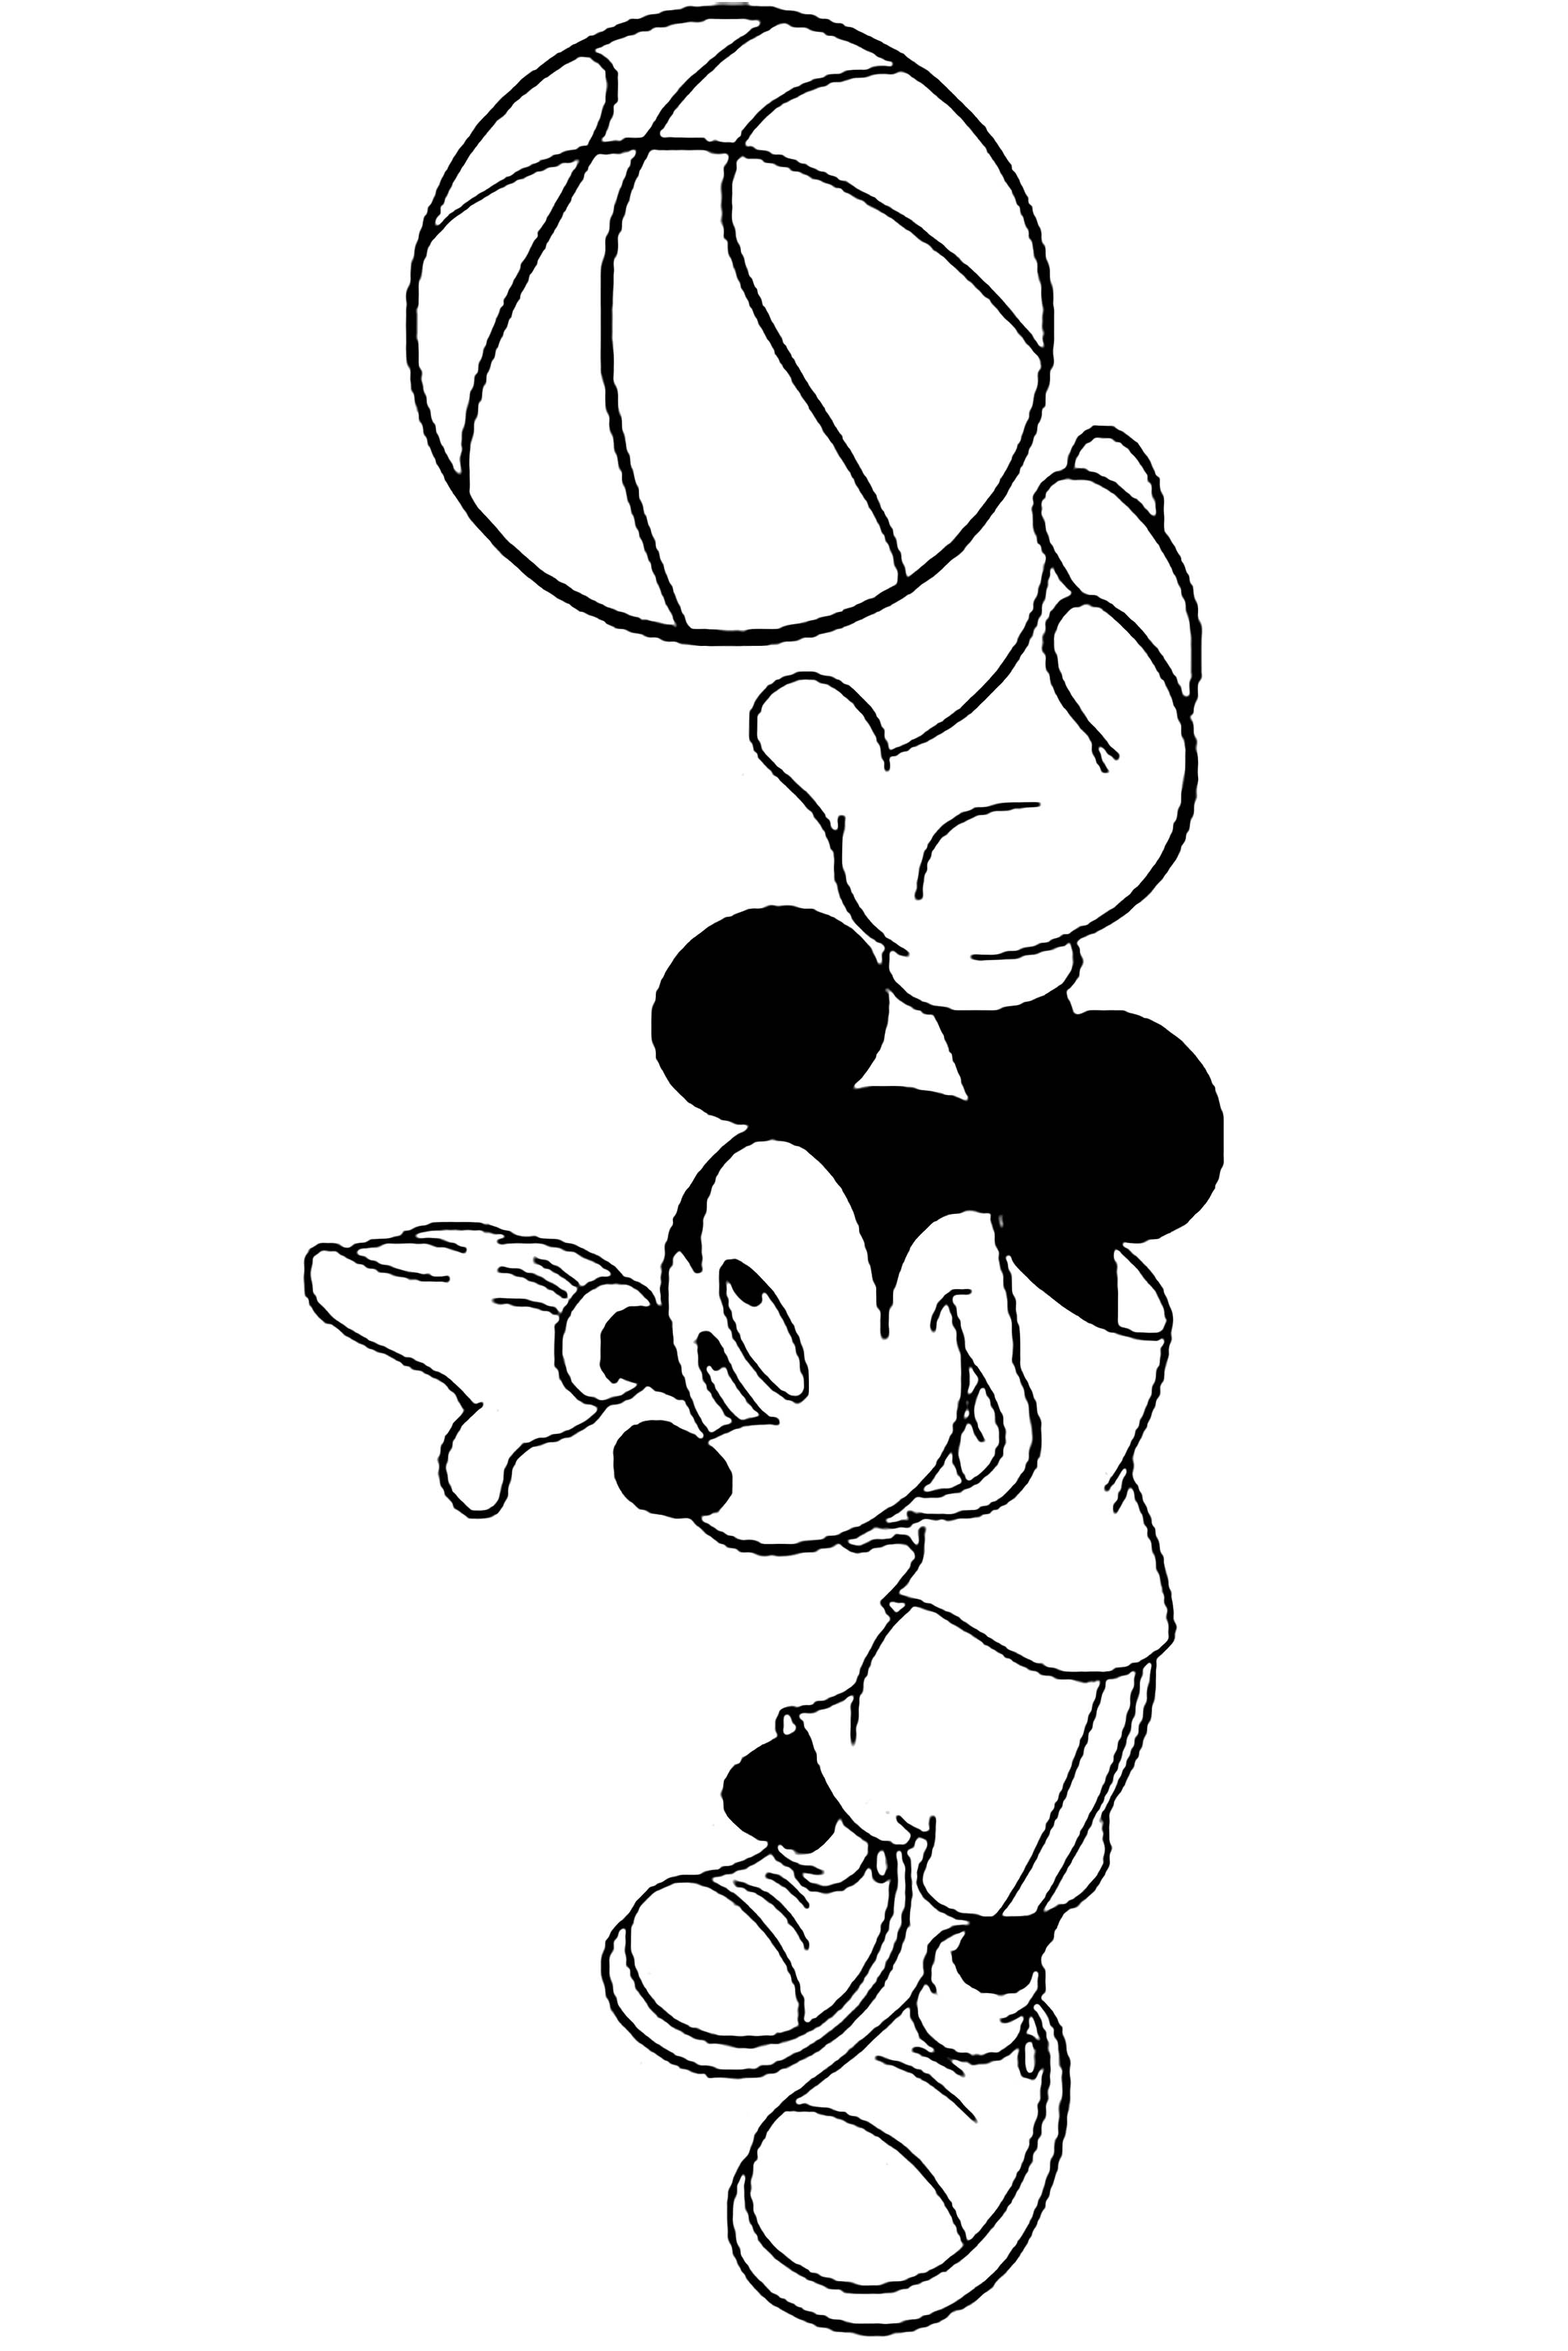 Basketball coloring pages to print - Basketball Kids Coloring Pages